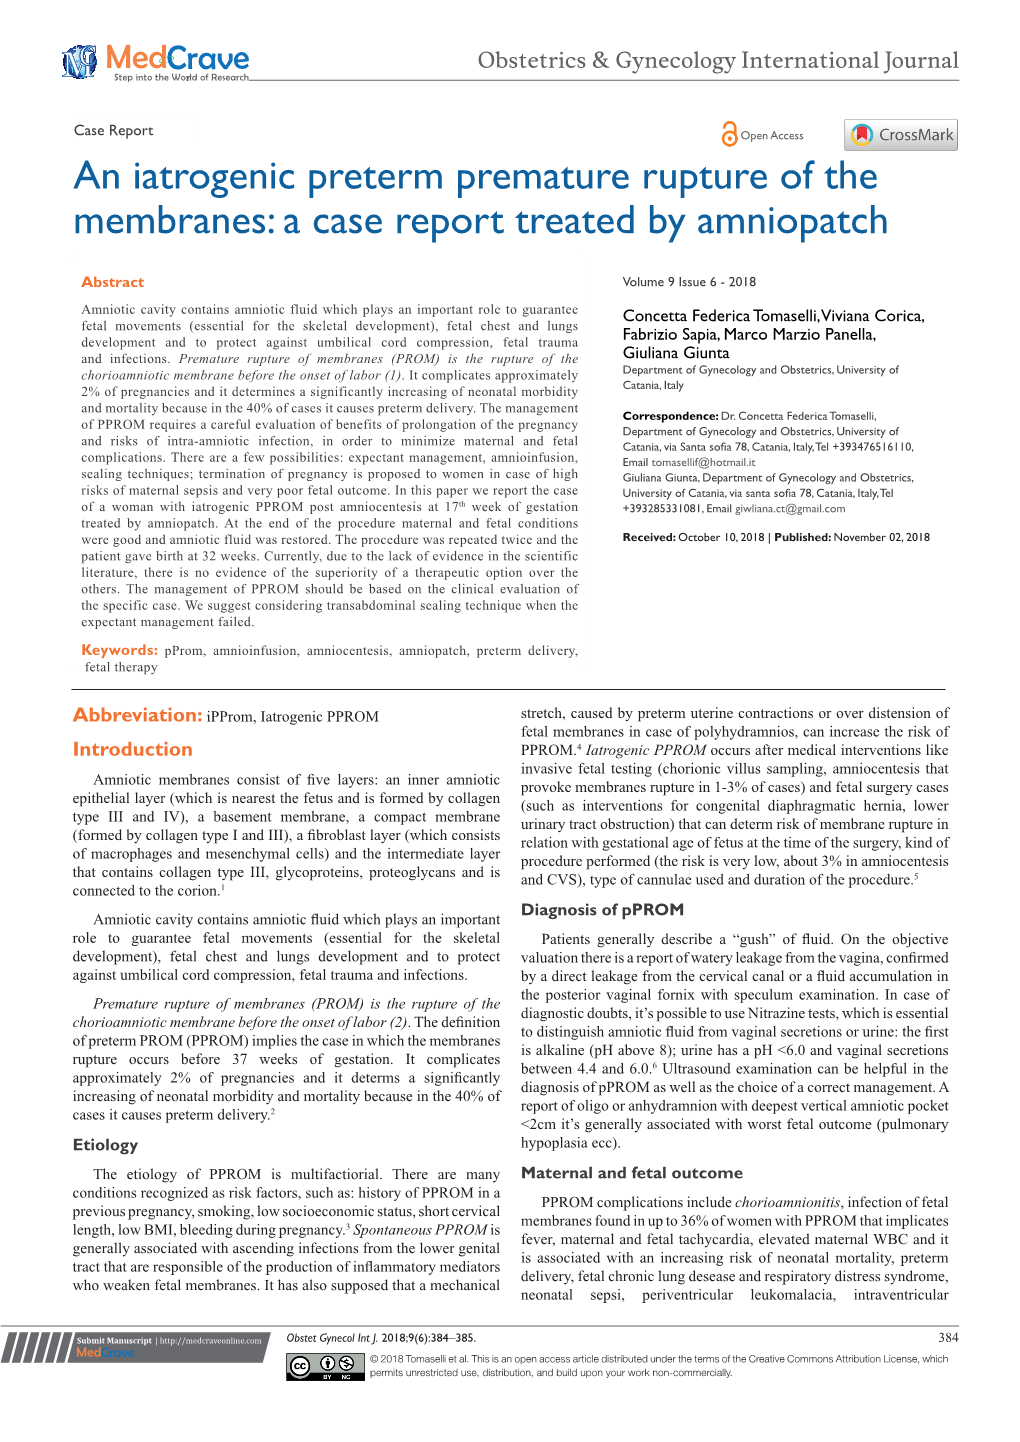 An Iatrogenic Preterm Premature Rupture of the Membranes: a Case Report Treated by Amniopatch